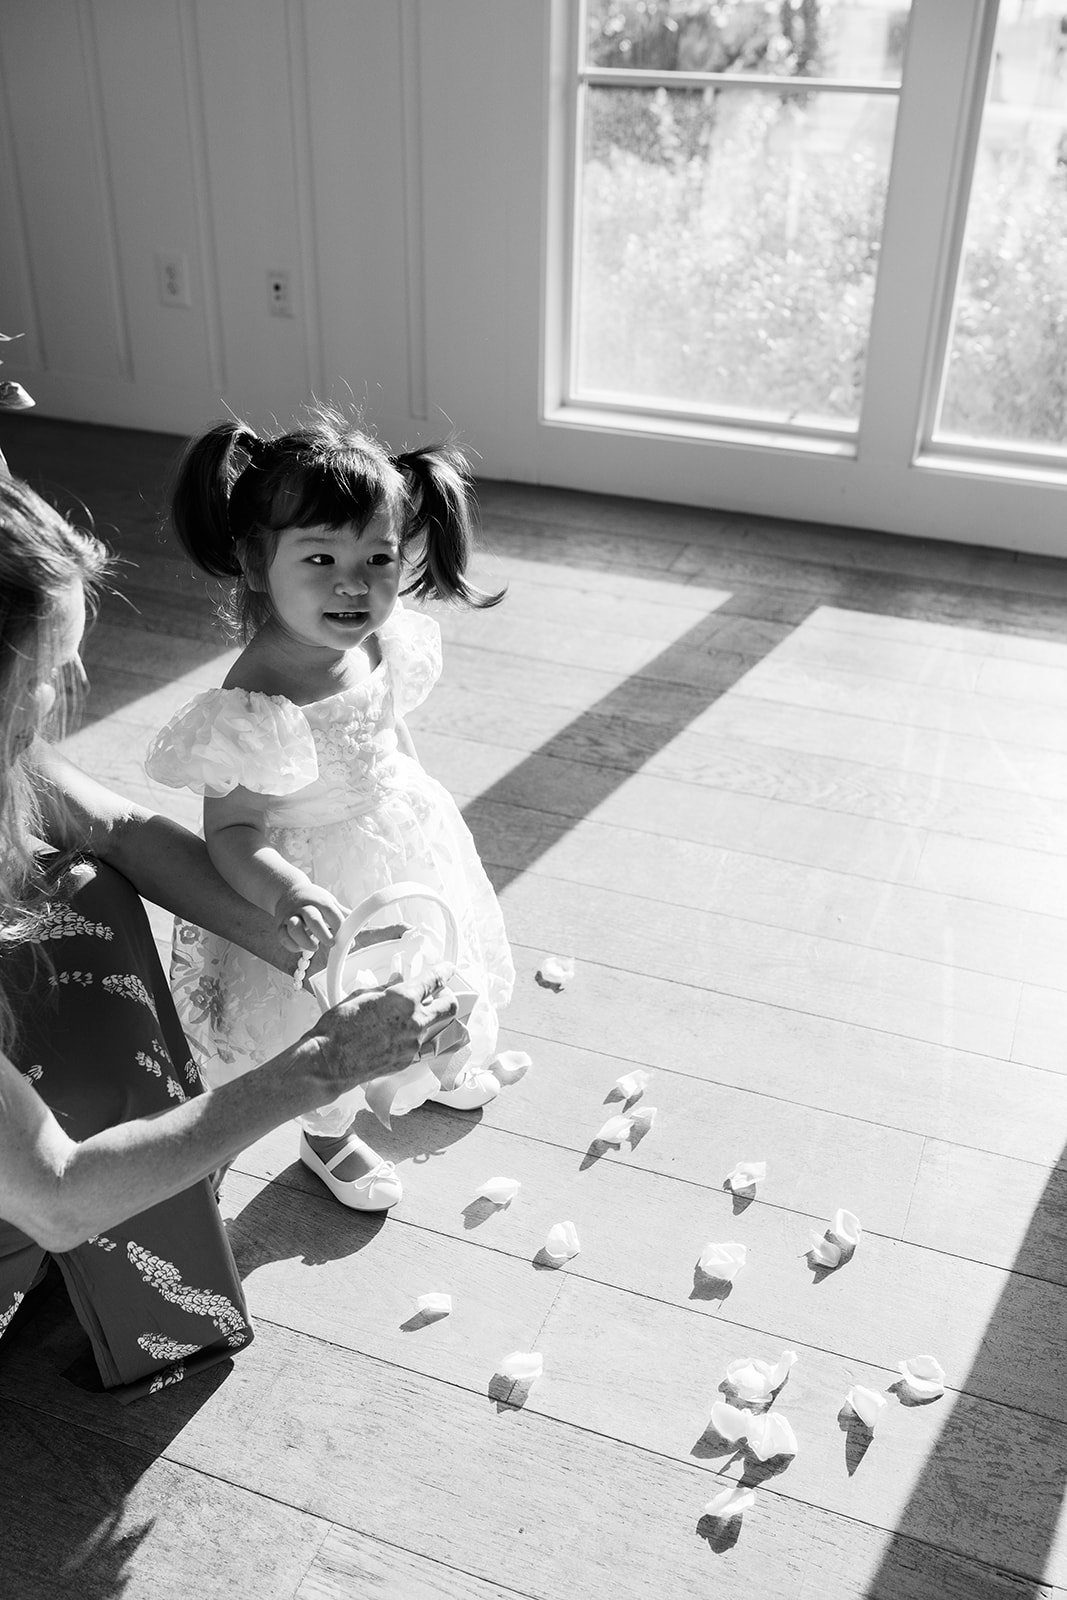 A woman and a child flower girl throwing flower petals on the floor.